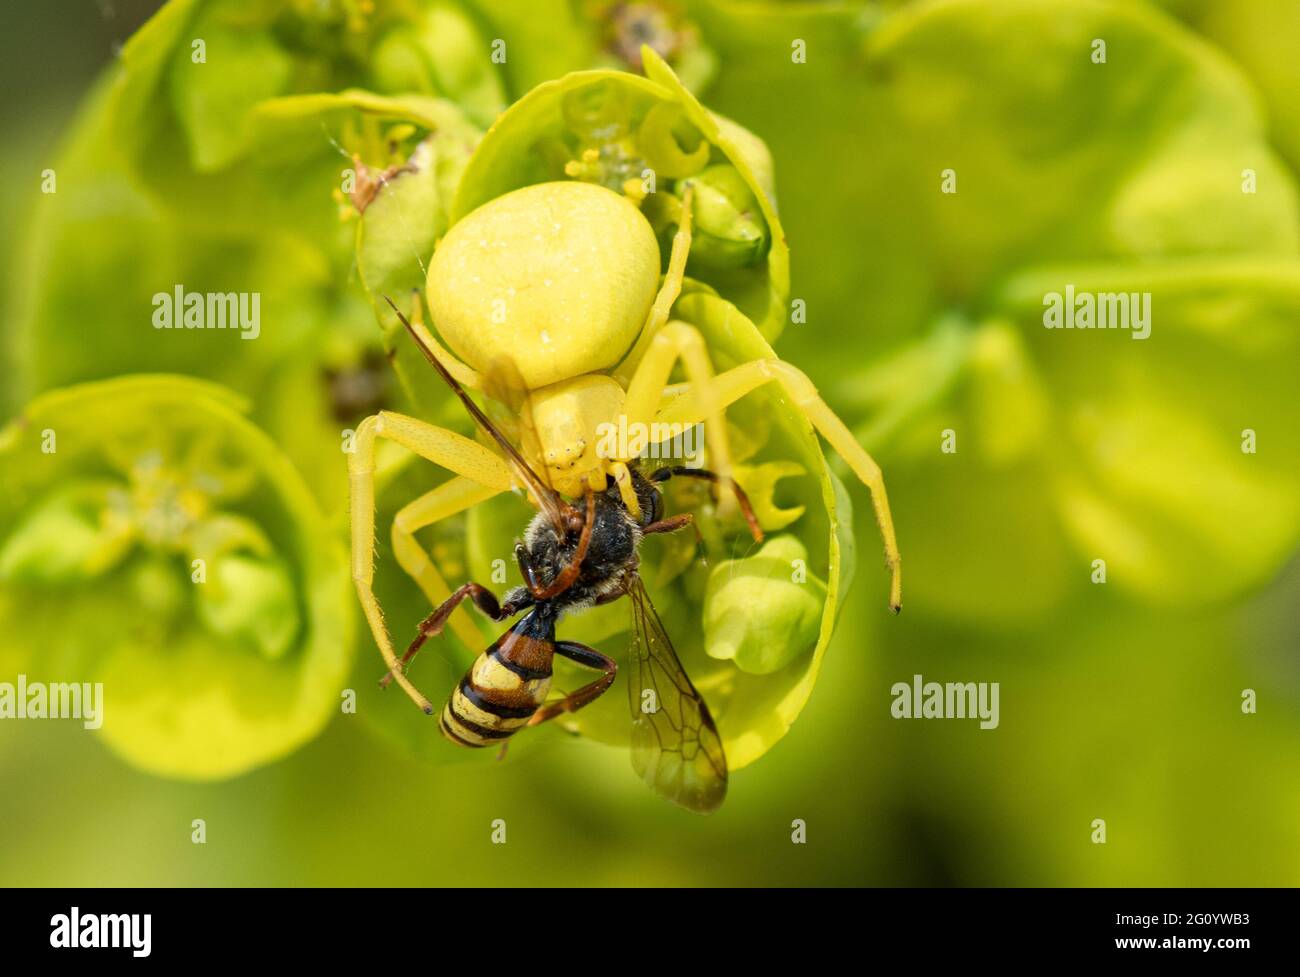 Flower crab spider (Misumena vatia) after catching prey, a solitary nomad bee, on wood spurge, UK. Yellow spider camouflaged on flower. Stock Photo